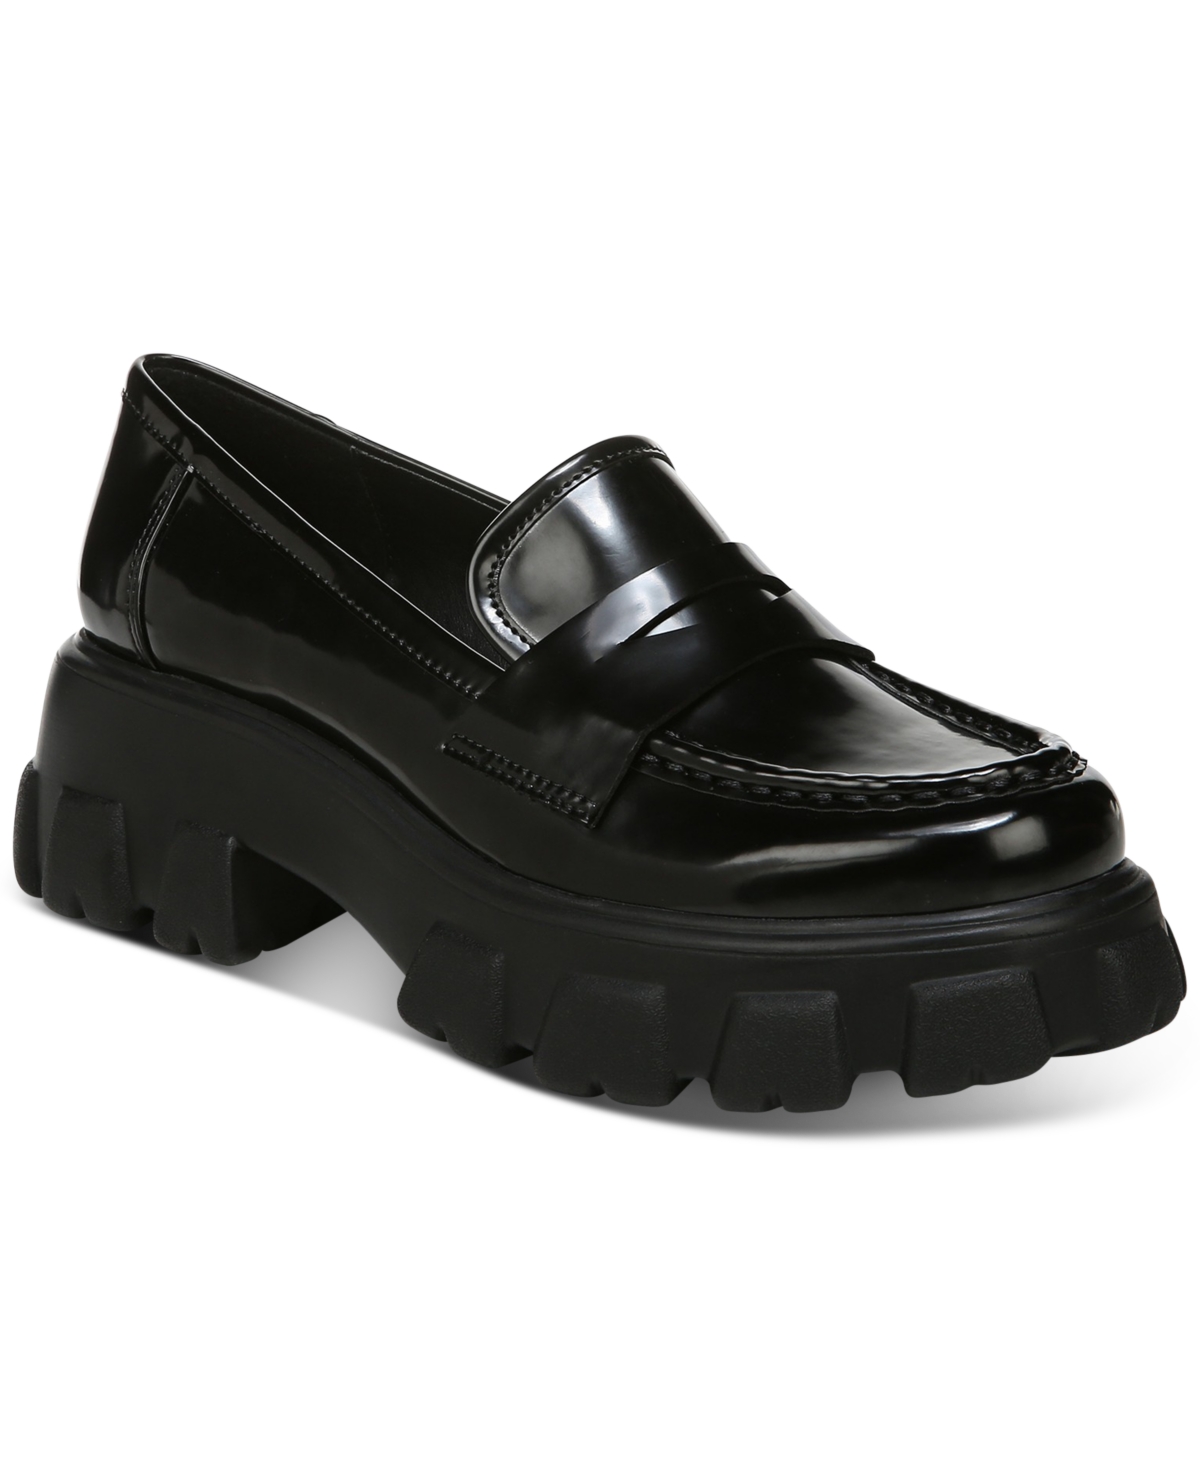 Paz Lug Sole Loafers, Created for Macy's - Black